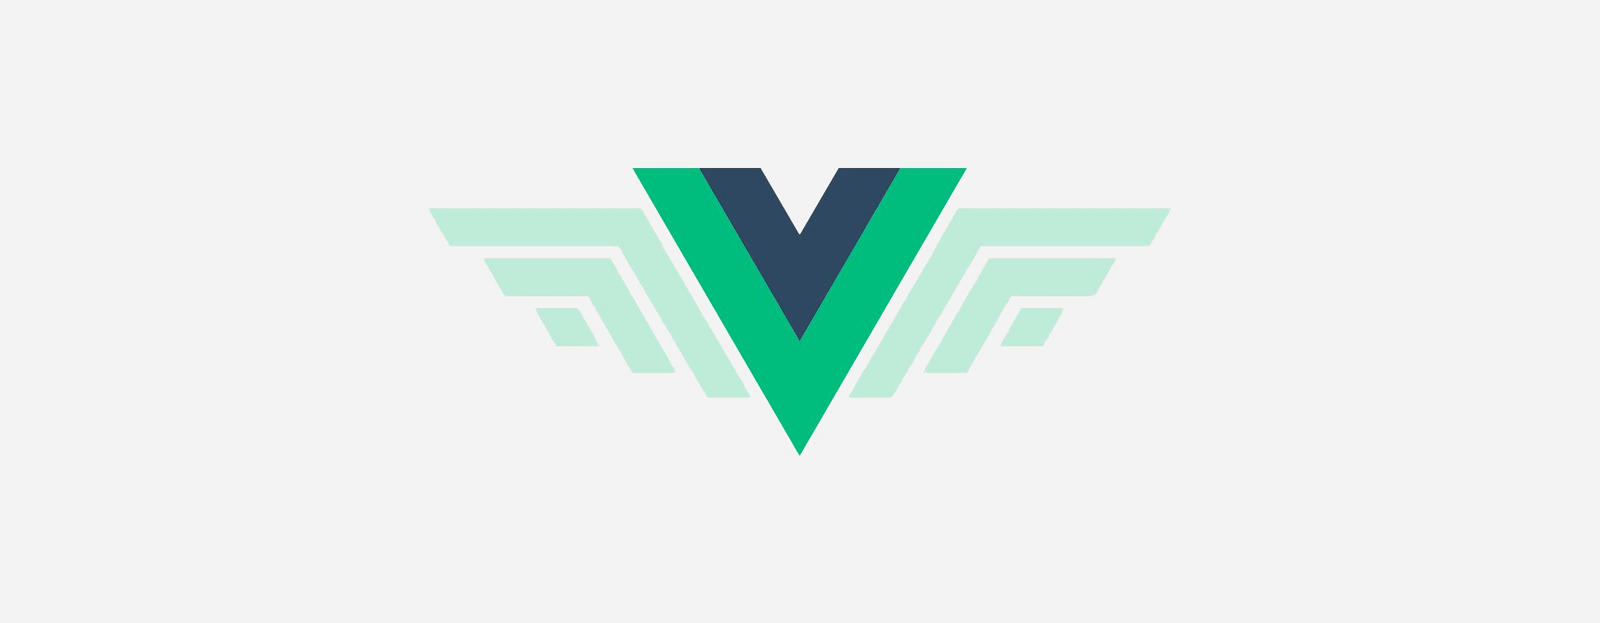 Code Coverage for Vue Applications